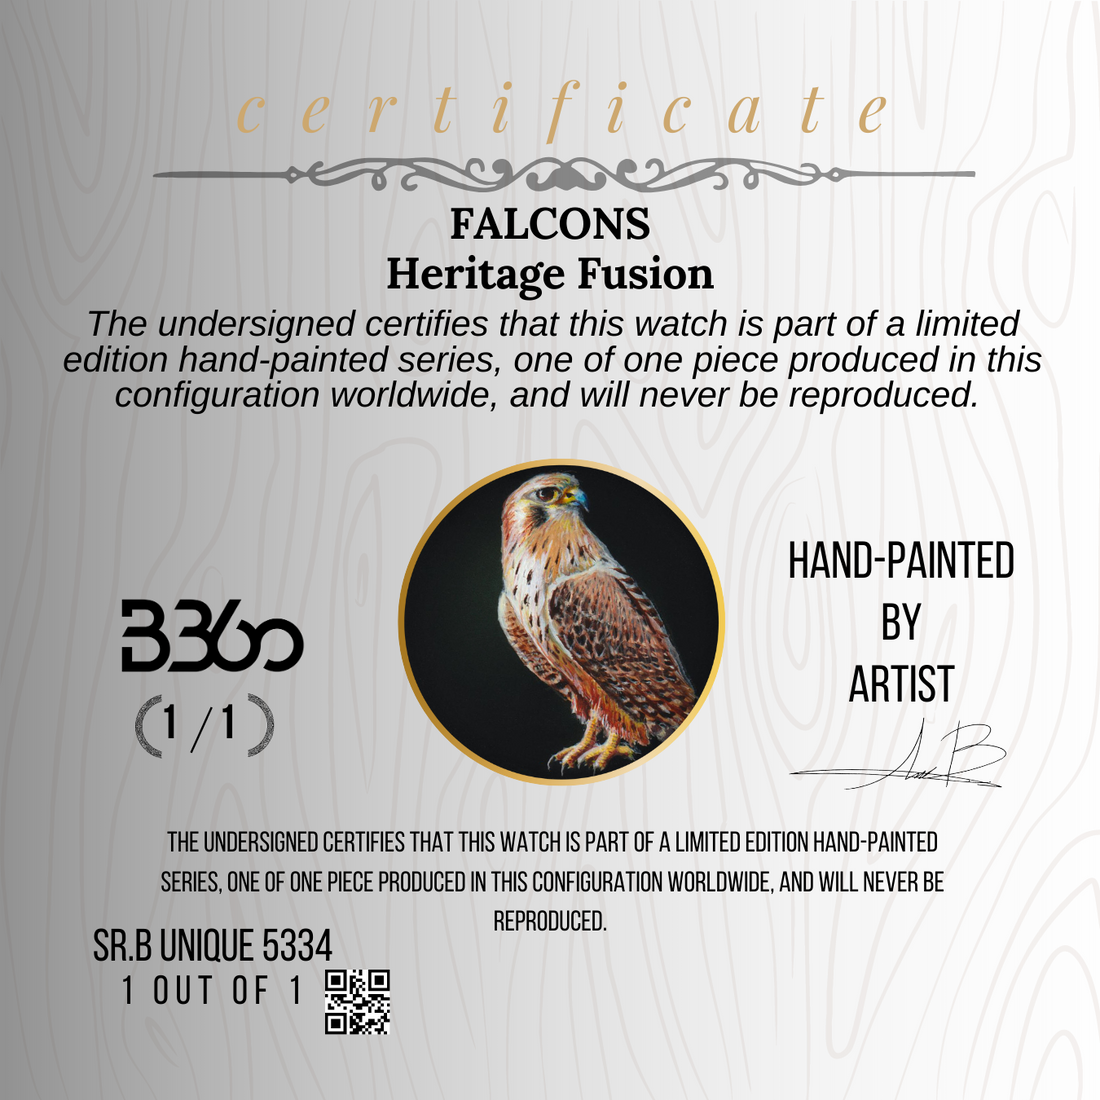 B360-unique-Hand painted-Falcons- SR. 5334 (1 out of 1)